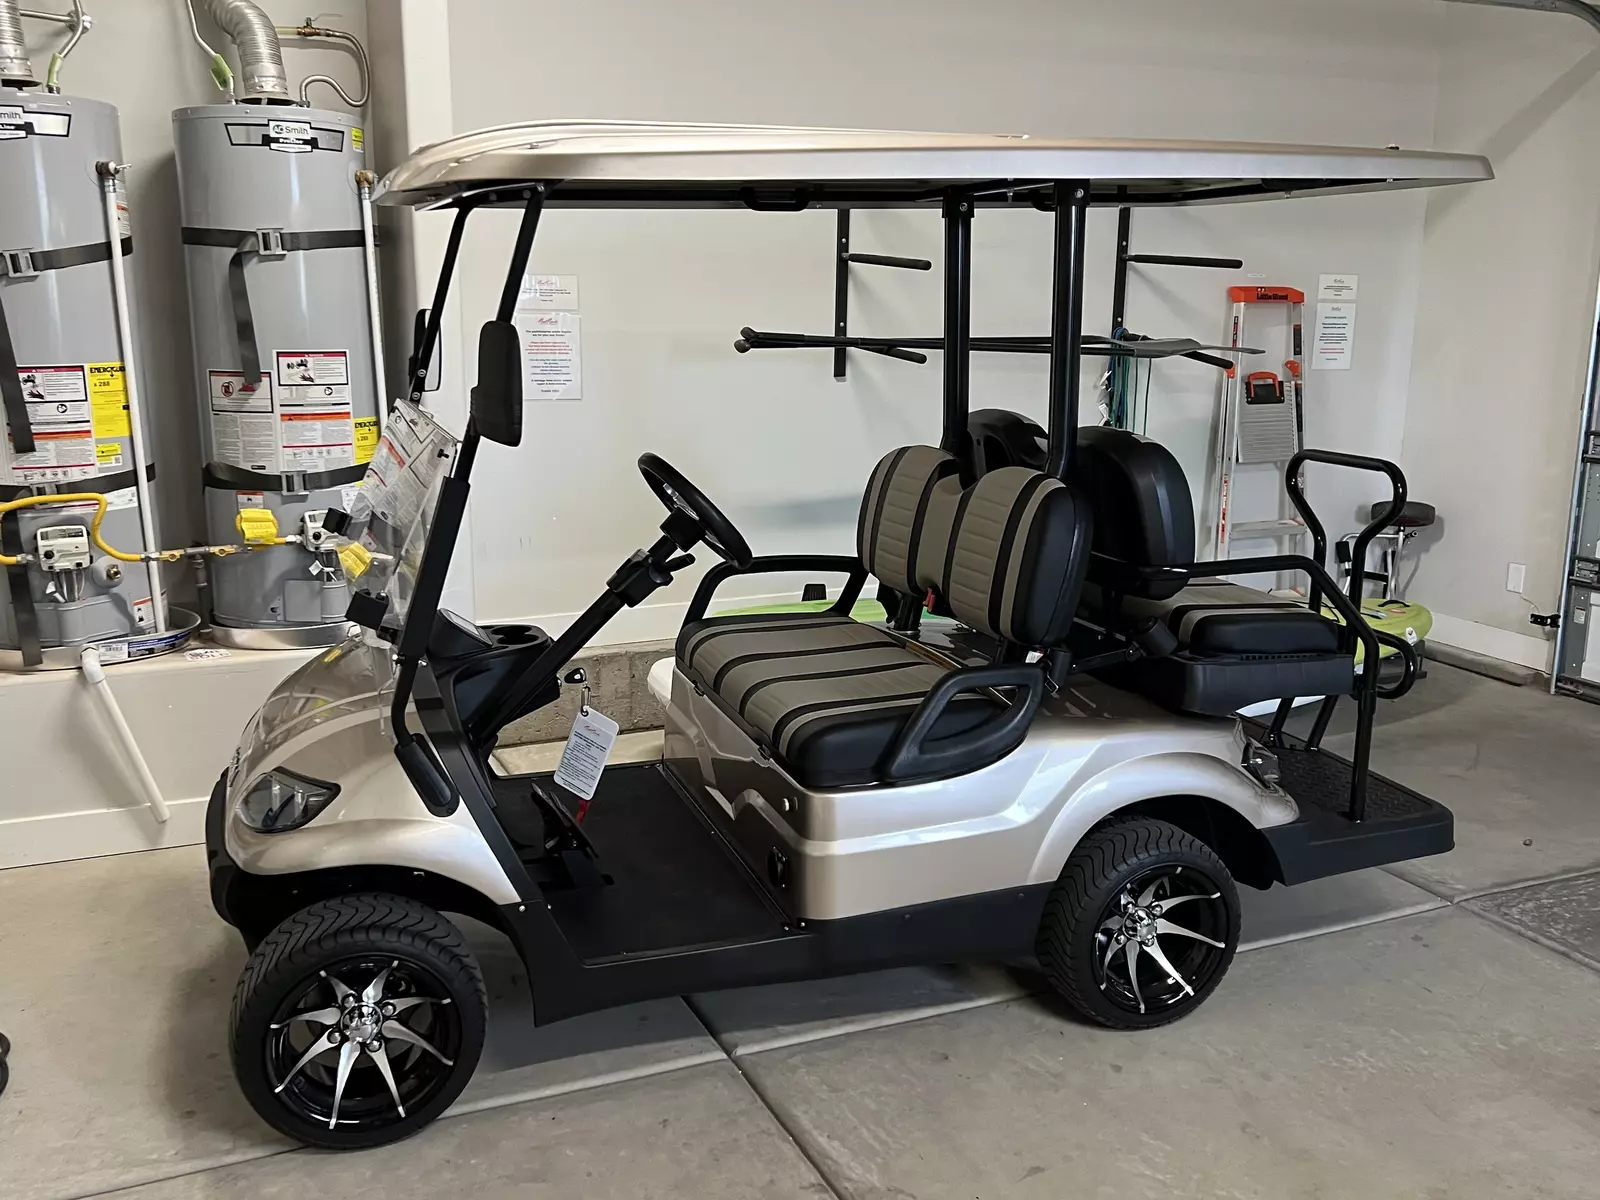 Golf Cart Included - Guest Responsible for Damage